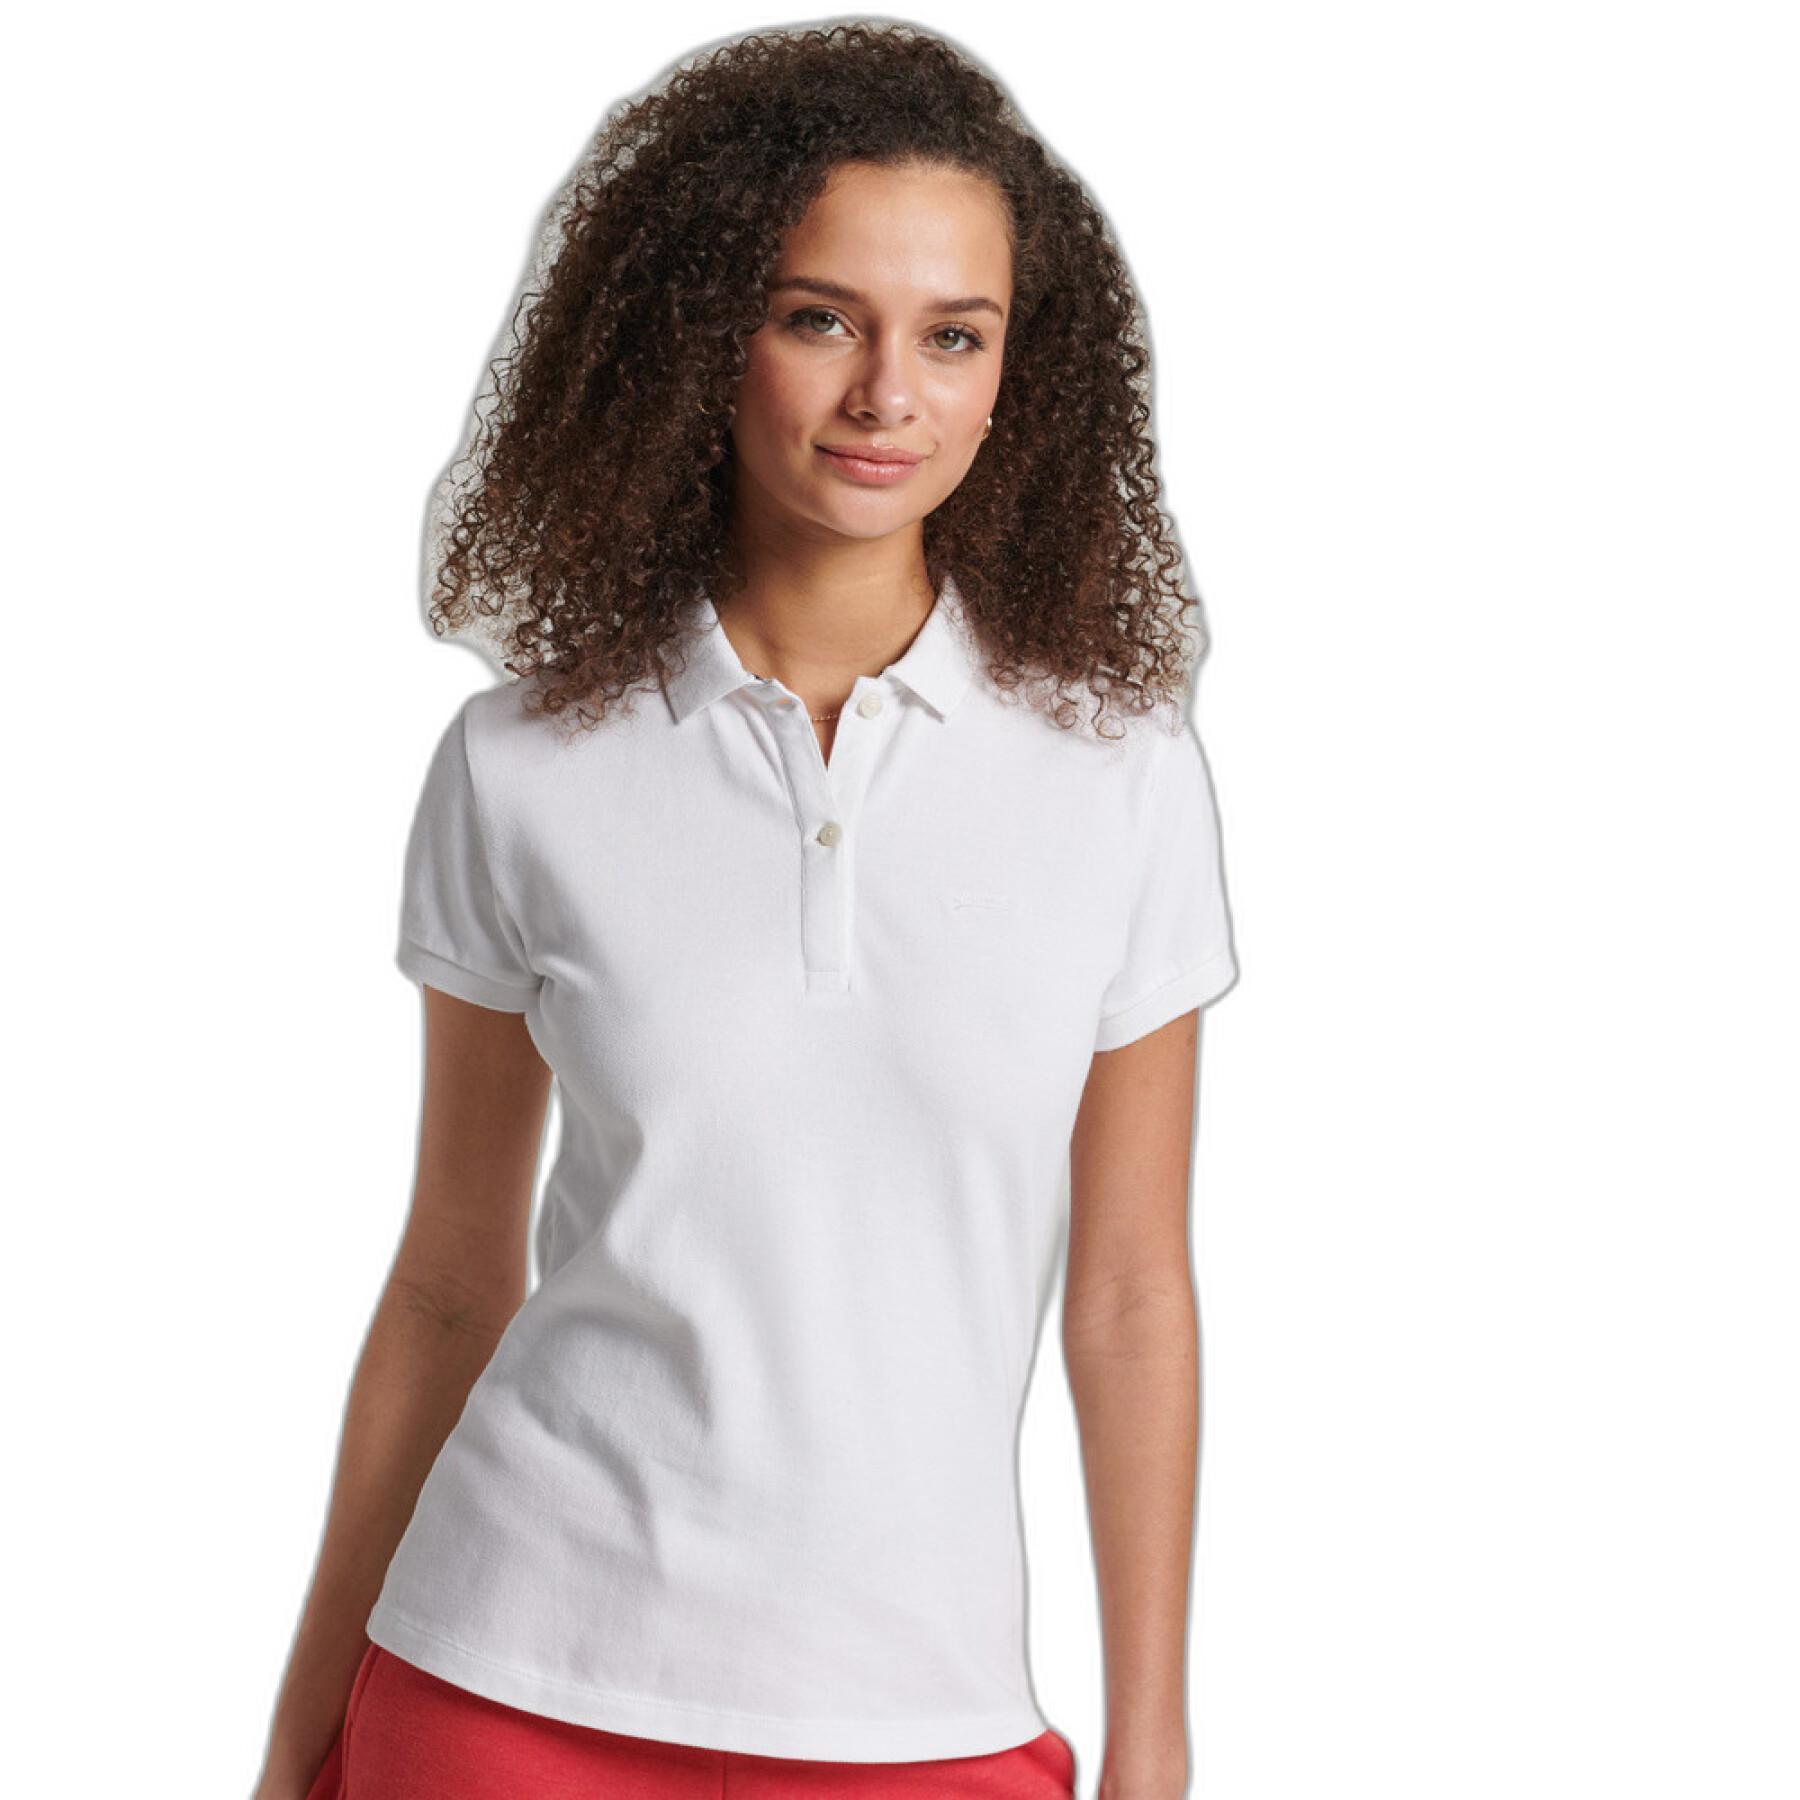 Women's polo shirt Superdry Vintage